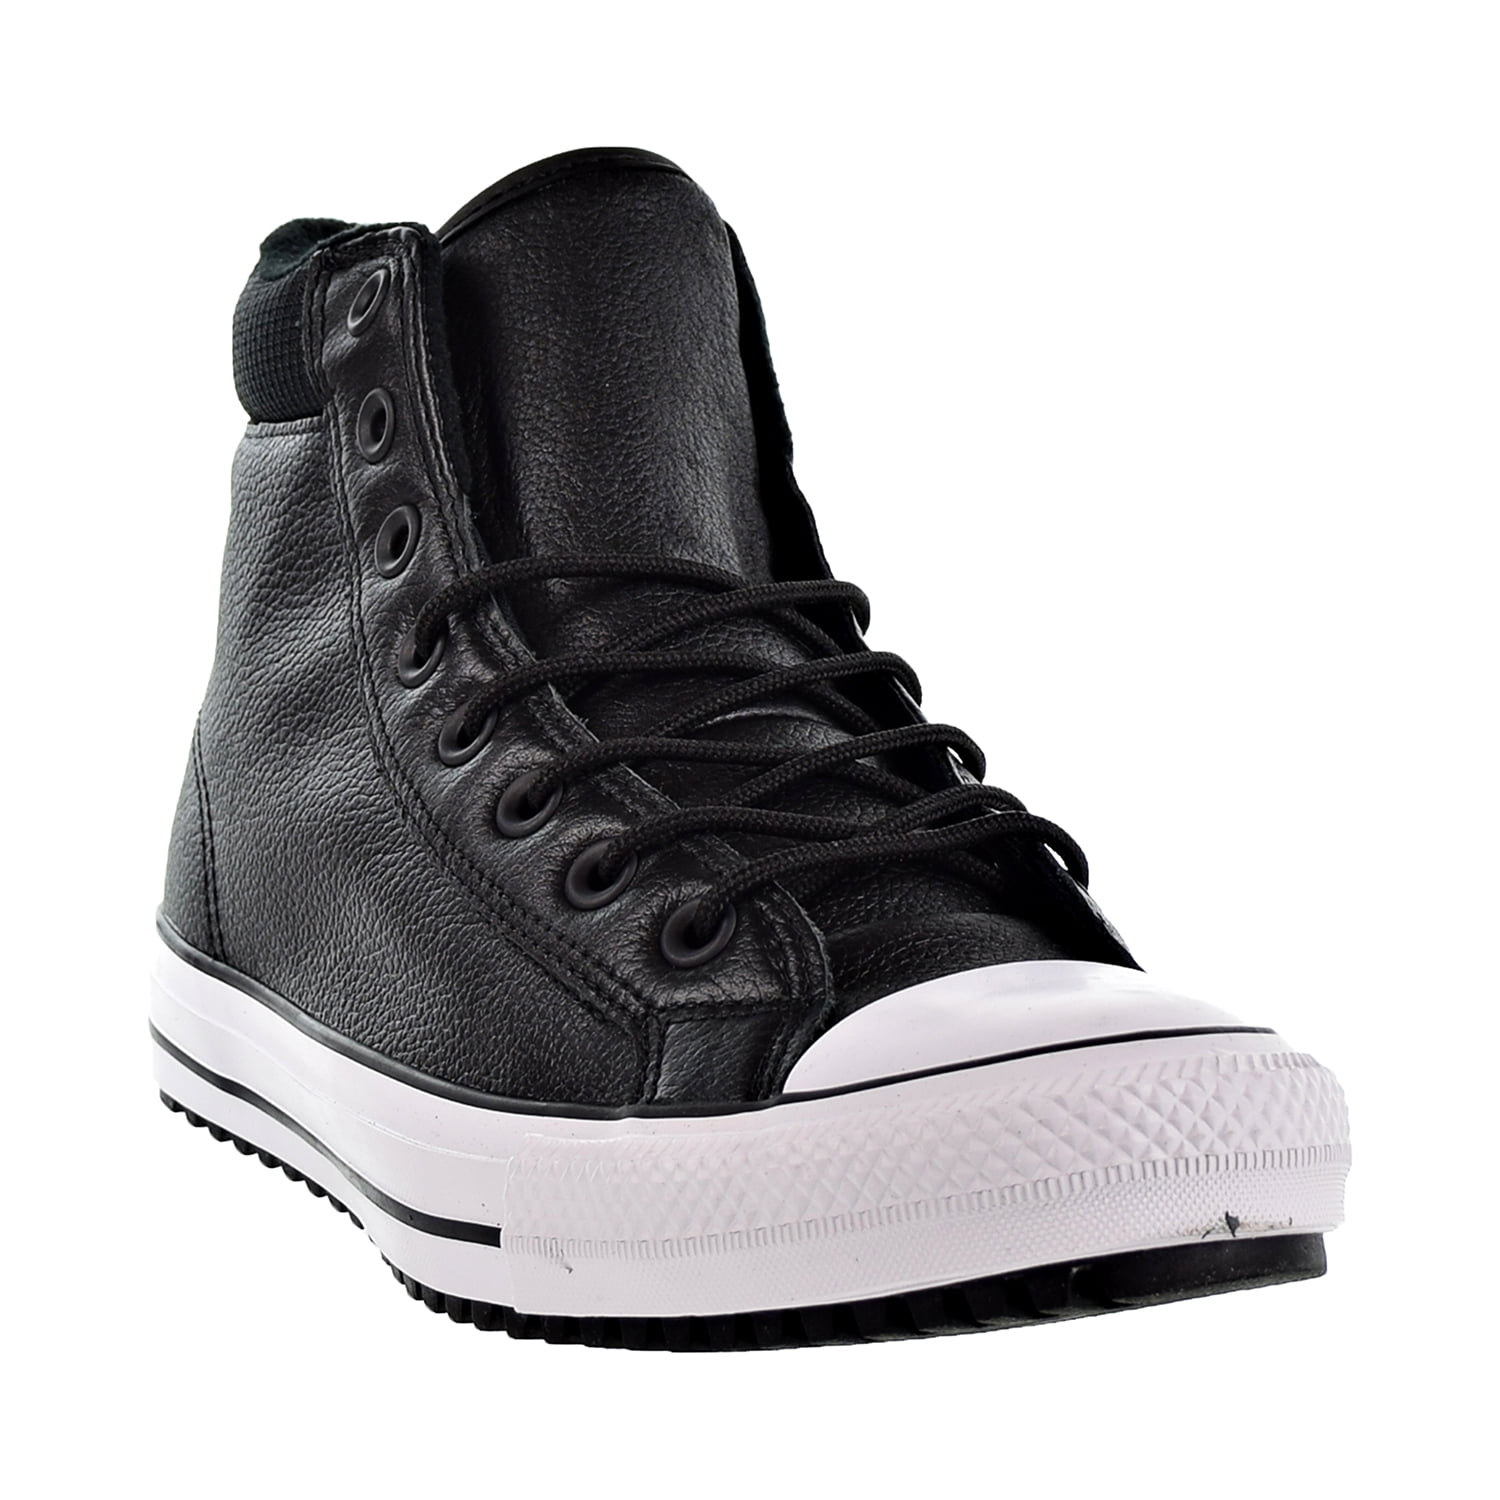 chuck taylor pc leather boot